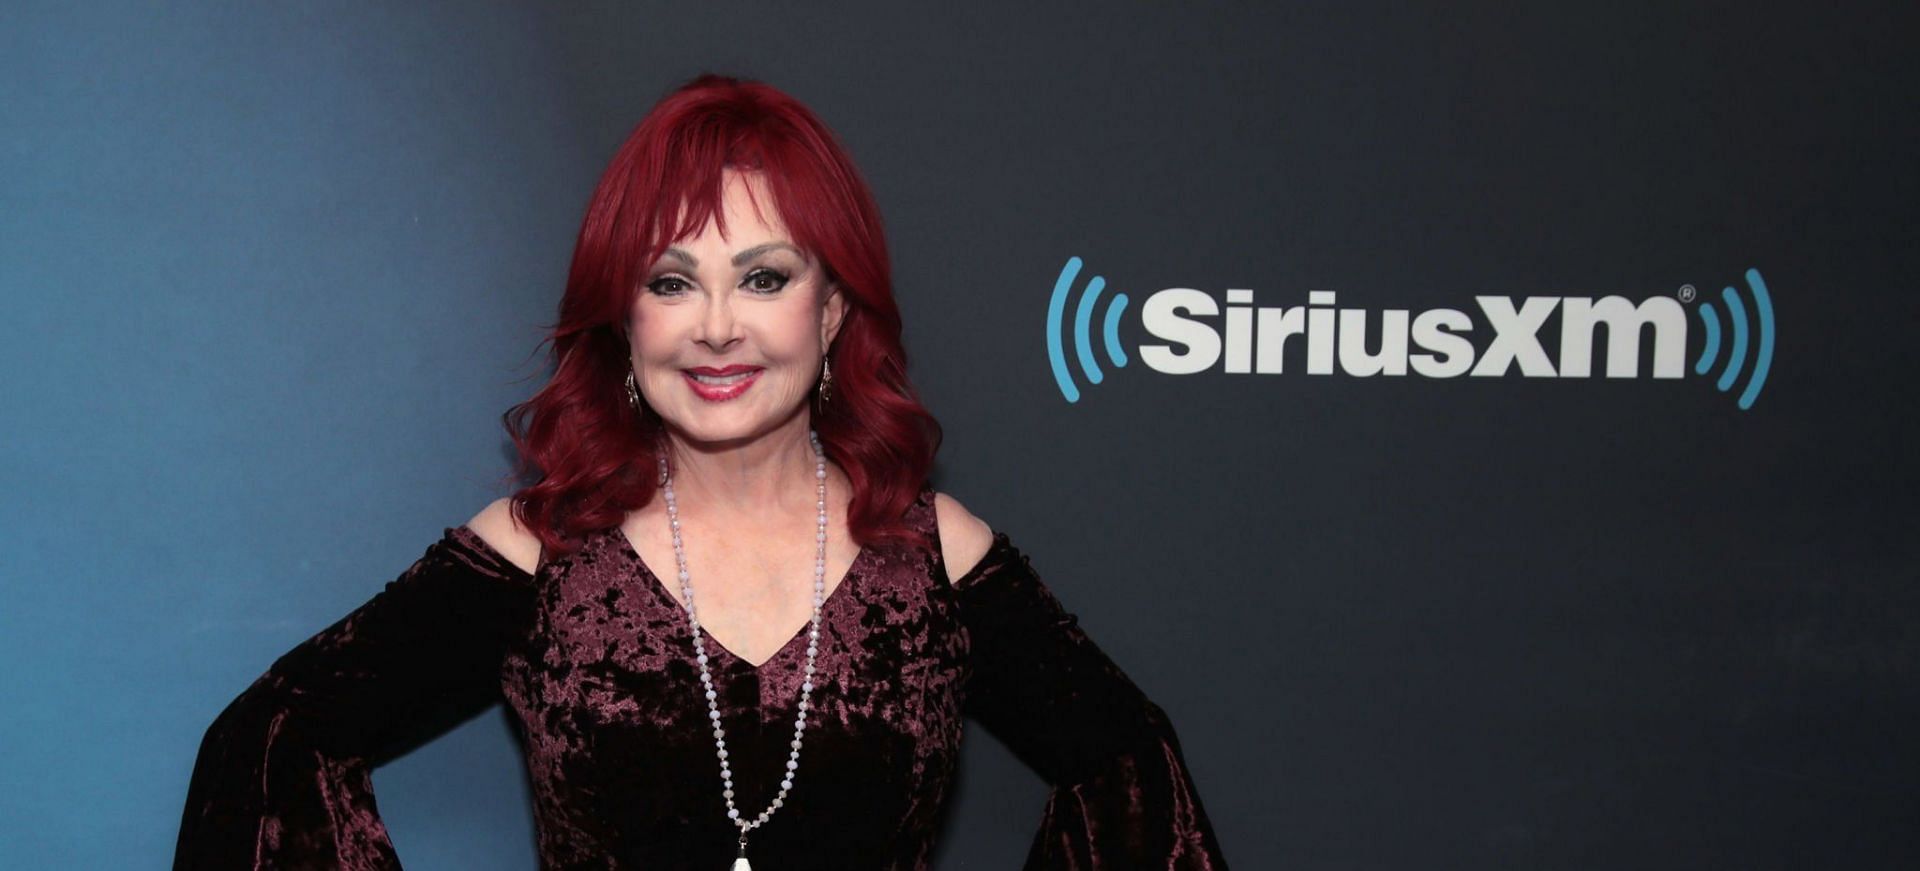 Naomi Judd battled severe depression throughout her life (Image via Cindy Ord/Getty Images)